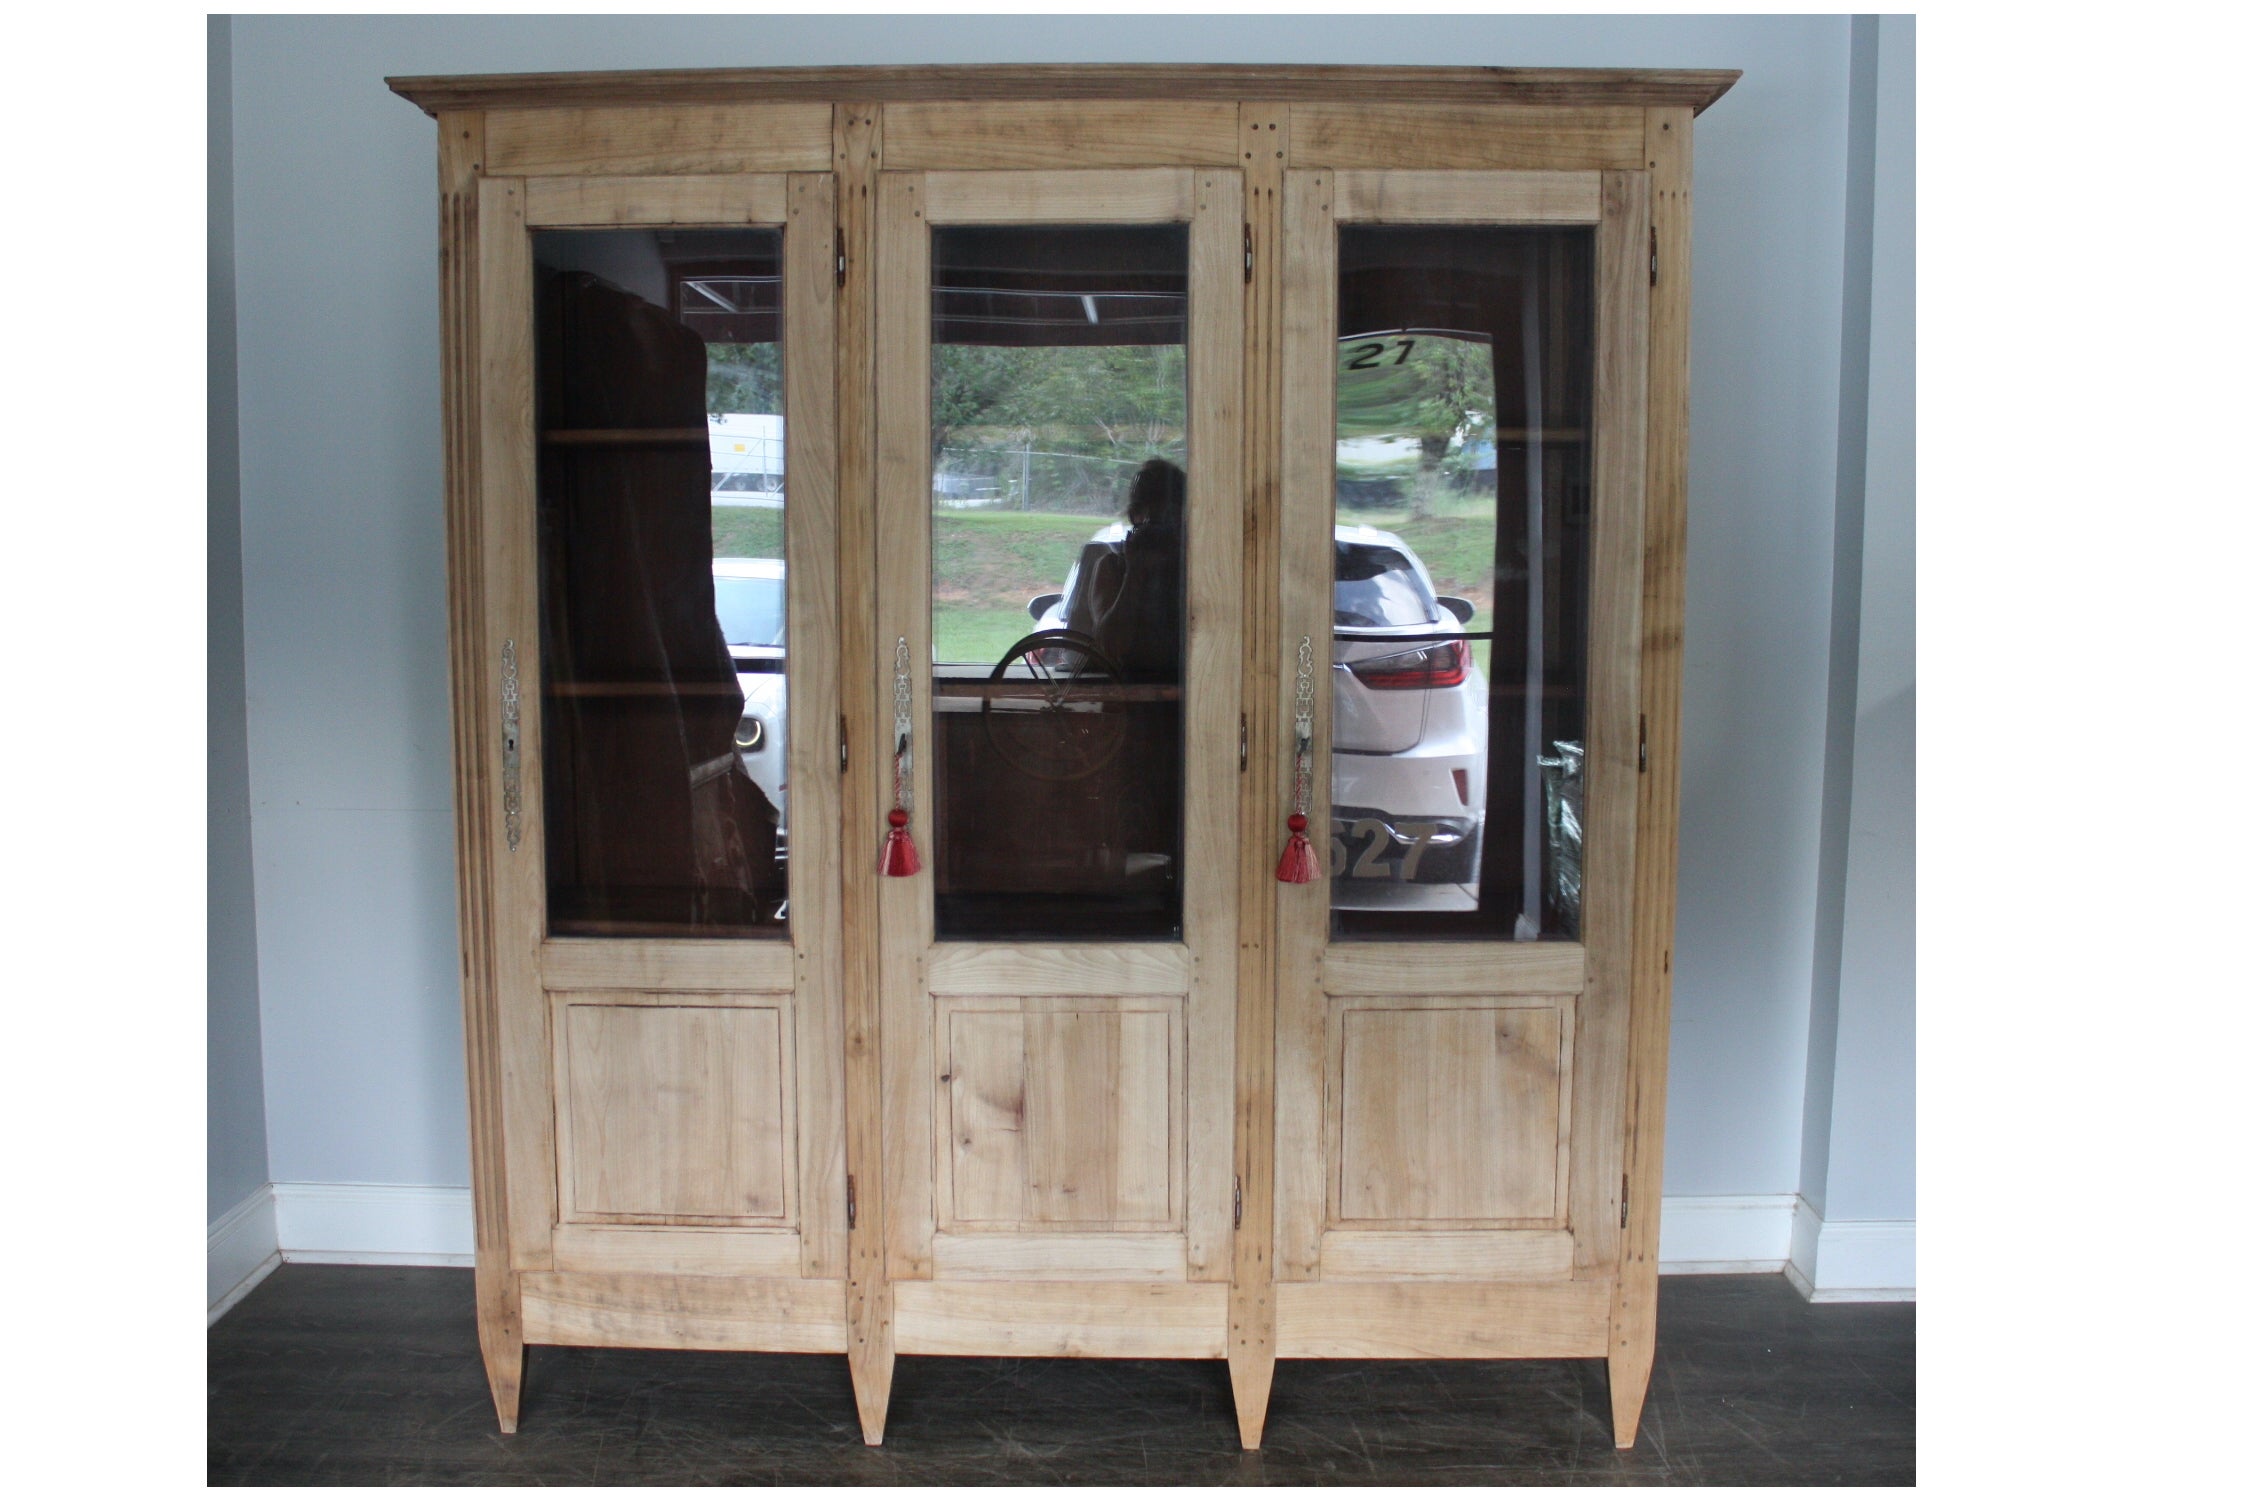 This Vitrine 3 doors has been refinished and has a thin Burgundy paint color inside. The left and right inside dimensions of the doors is 22.5''W x 13''D
The center door is 21.25''W.